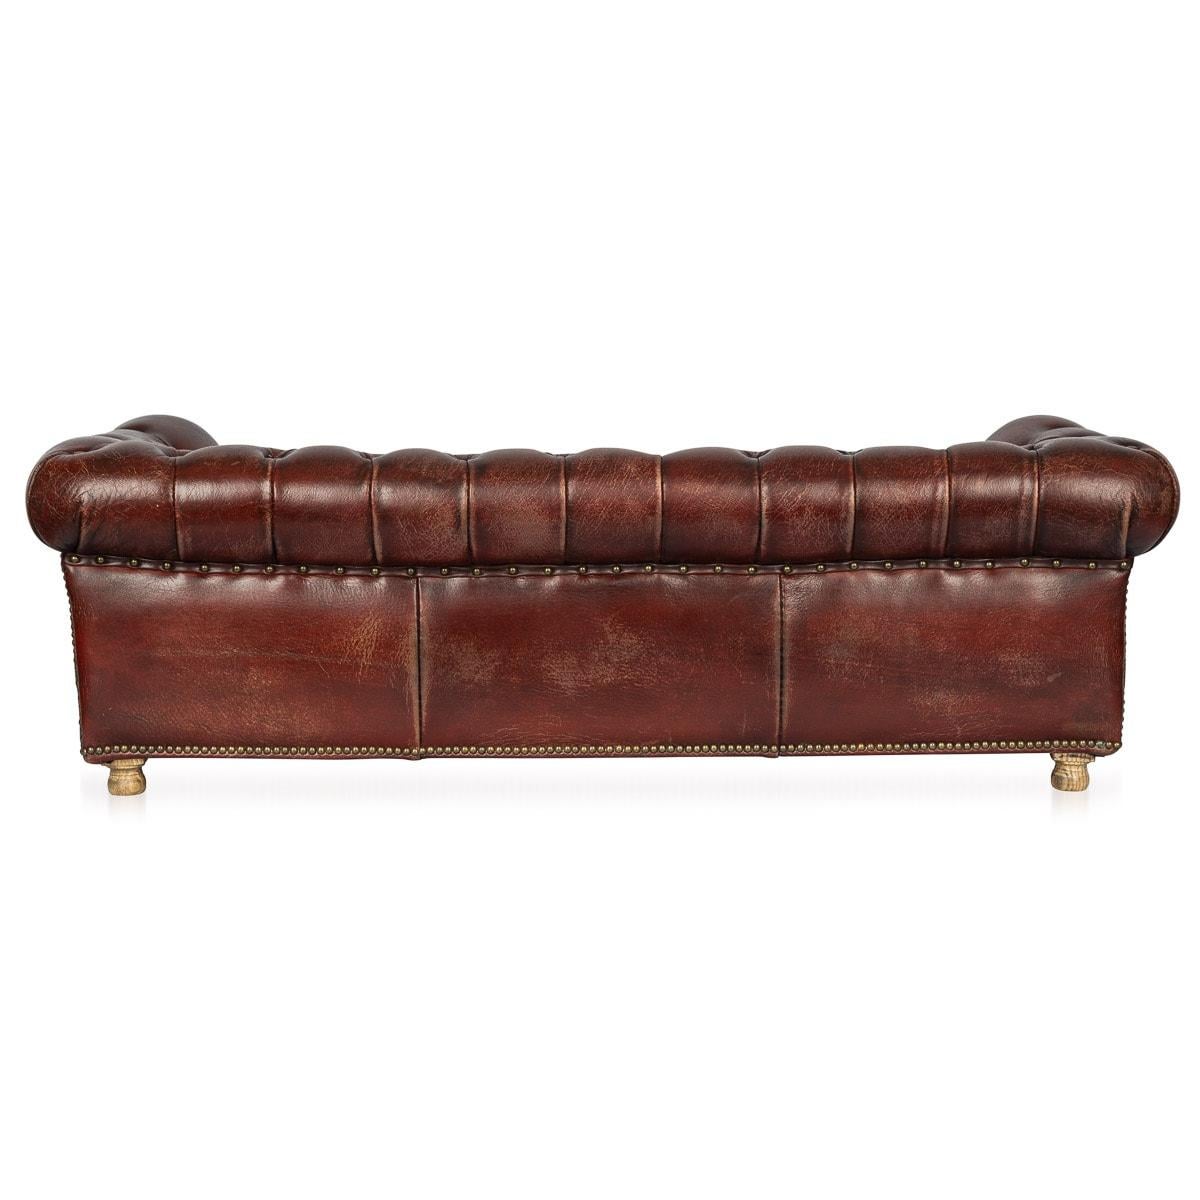 20th Century English Chesterfield Miniature Leather Sofa With Cushion Seats For Sale 1